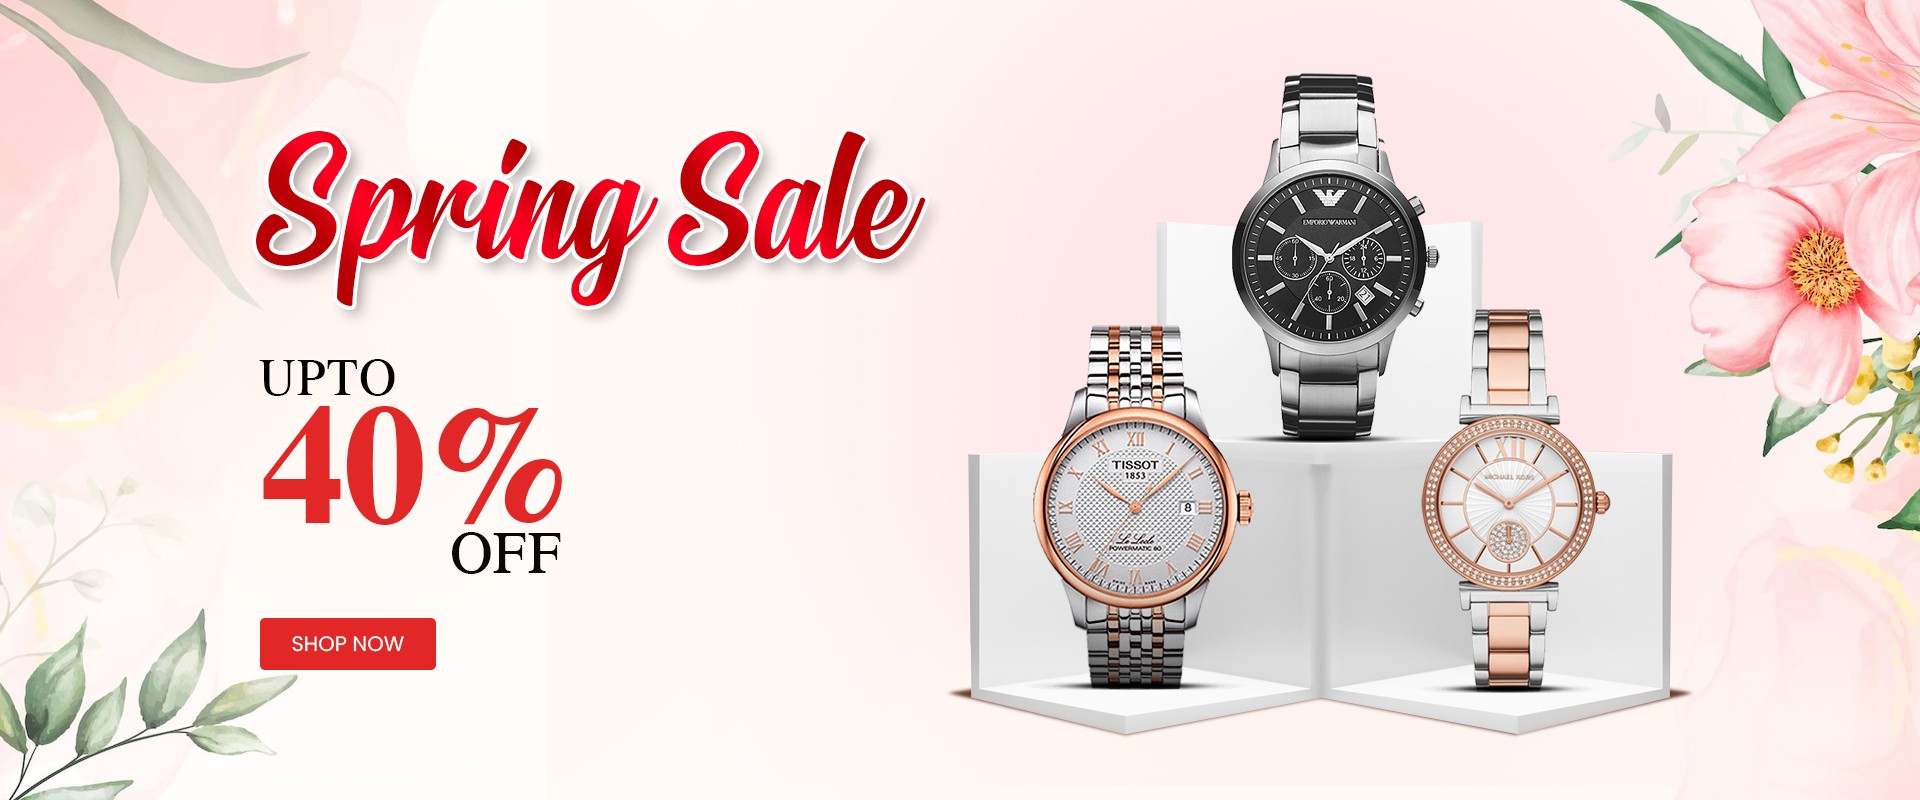 Sale poster with watches